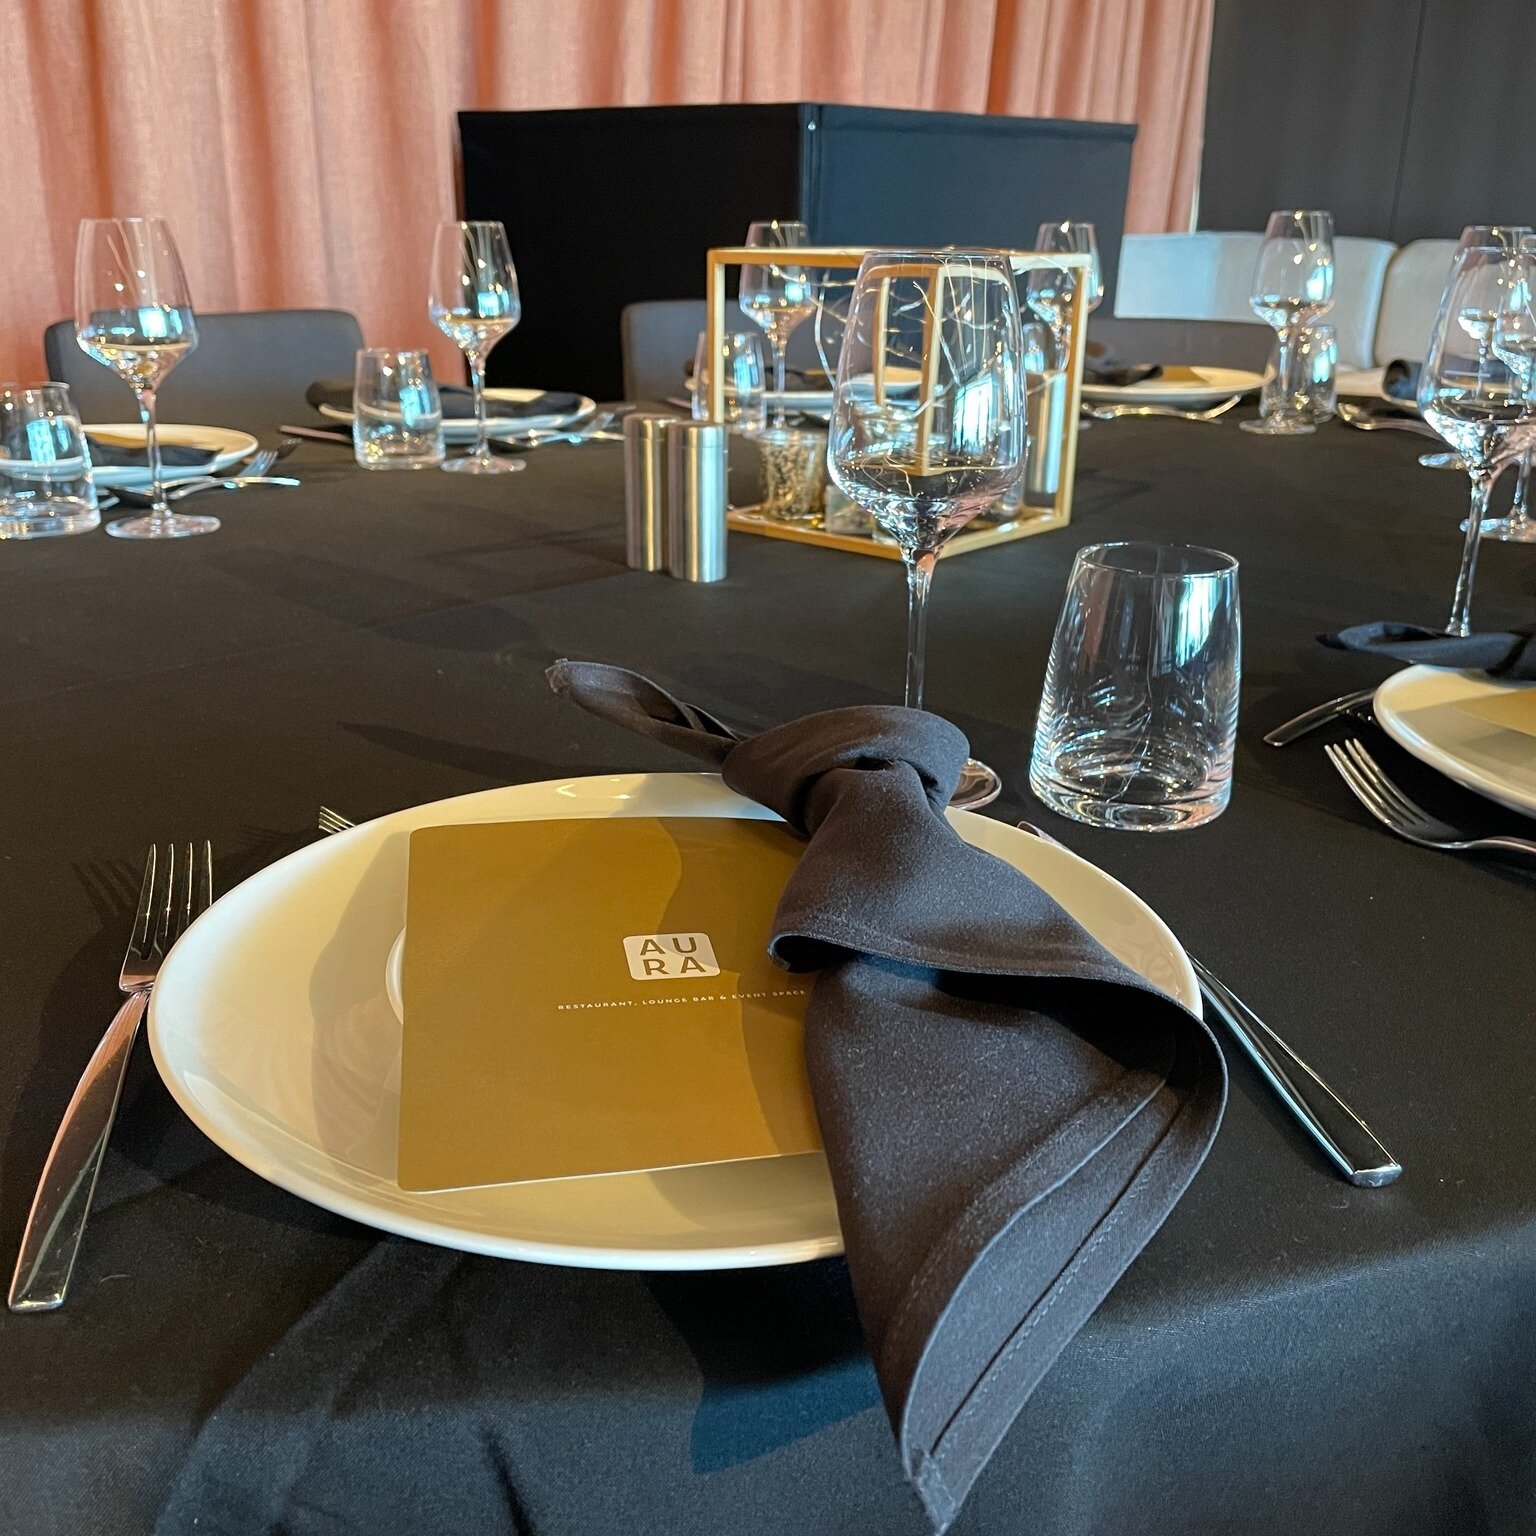 Discover the endless possibilities and create lasting memories with us. 🎊🎉

Click on the link in the bio to inquire and let's plan your event together.🔗

#aurahobart #events #eventspace #celebrations #eventsplanner